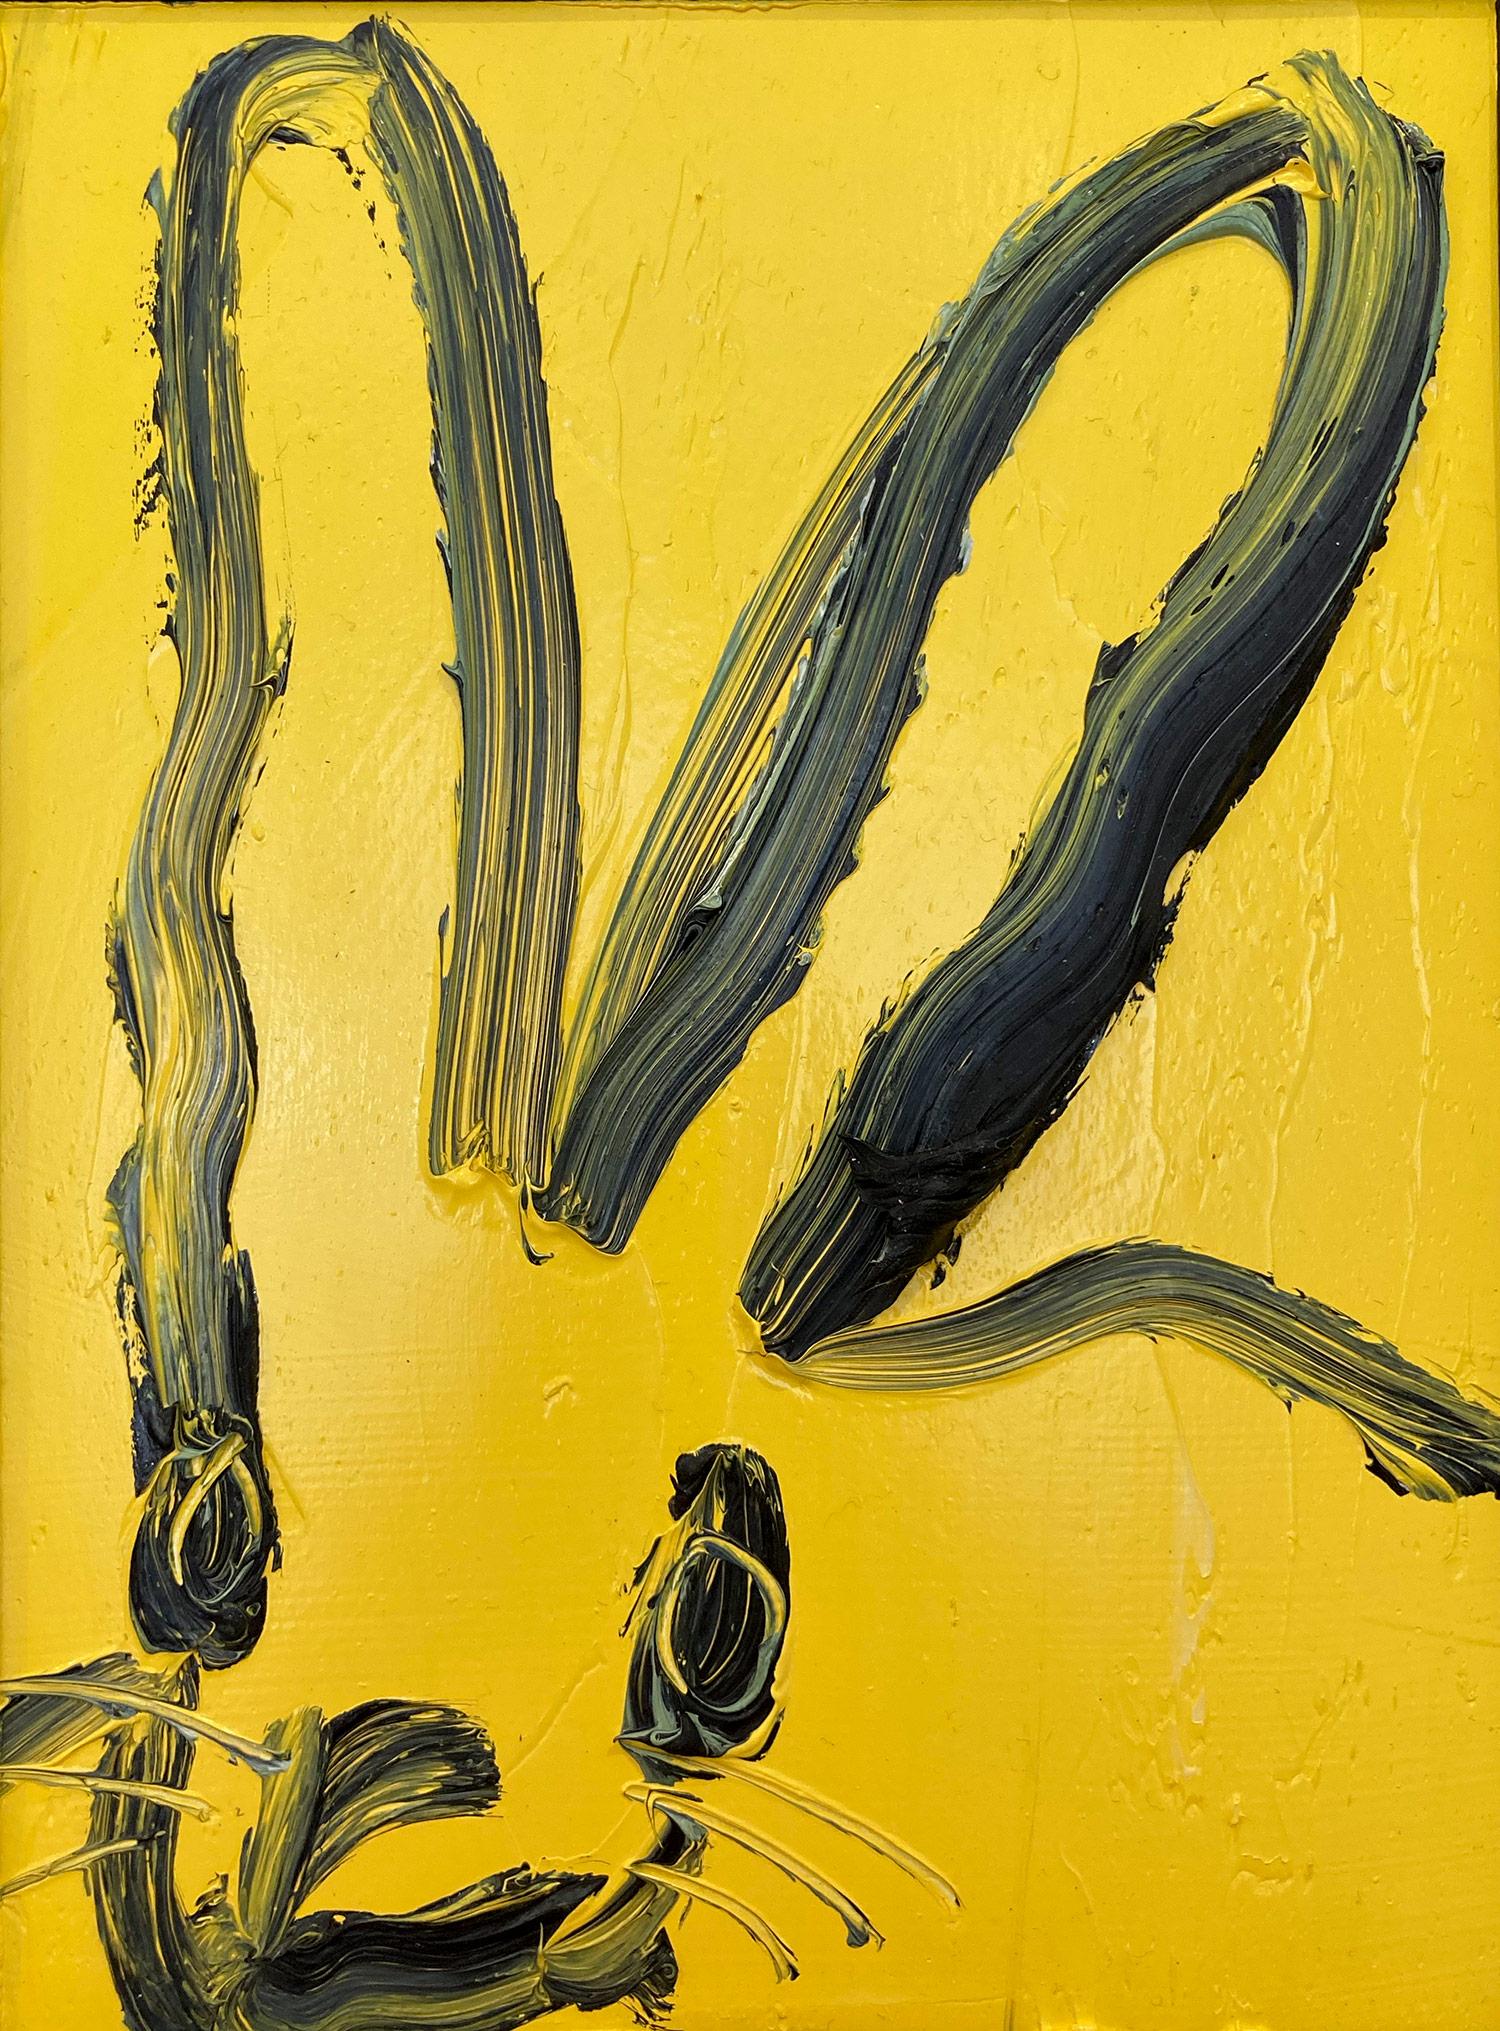 A wonderful composition of one of Slonem's most iconic subjects, Bunnies. This piece depicts a gestural figure of a black bunny on a royal yellow background with thick use of paint. It is housed in a wonderful antique style frame. Inspired by nature